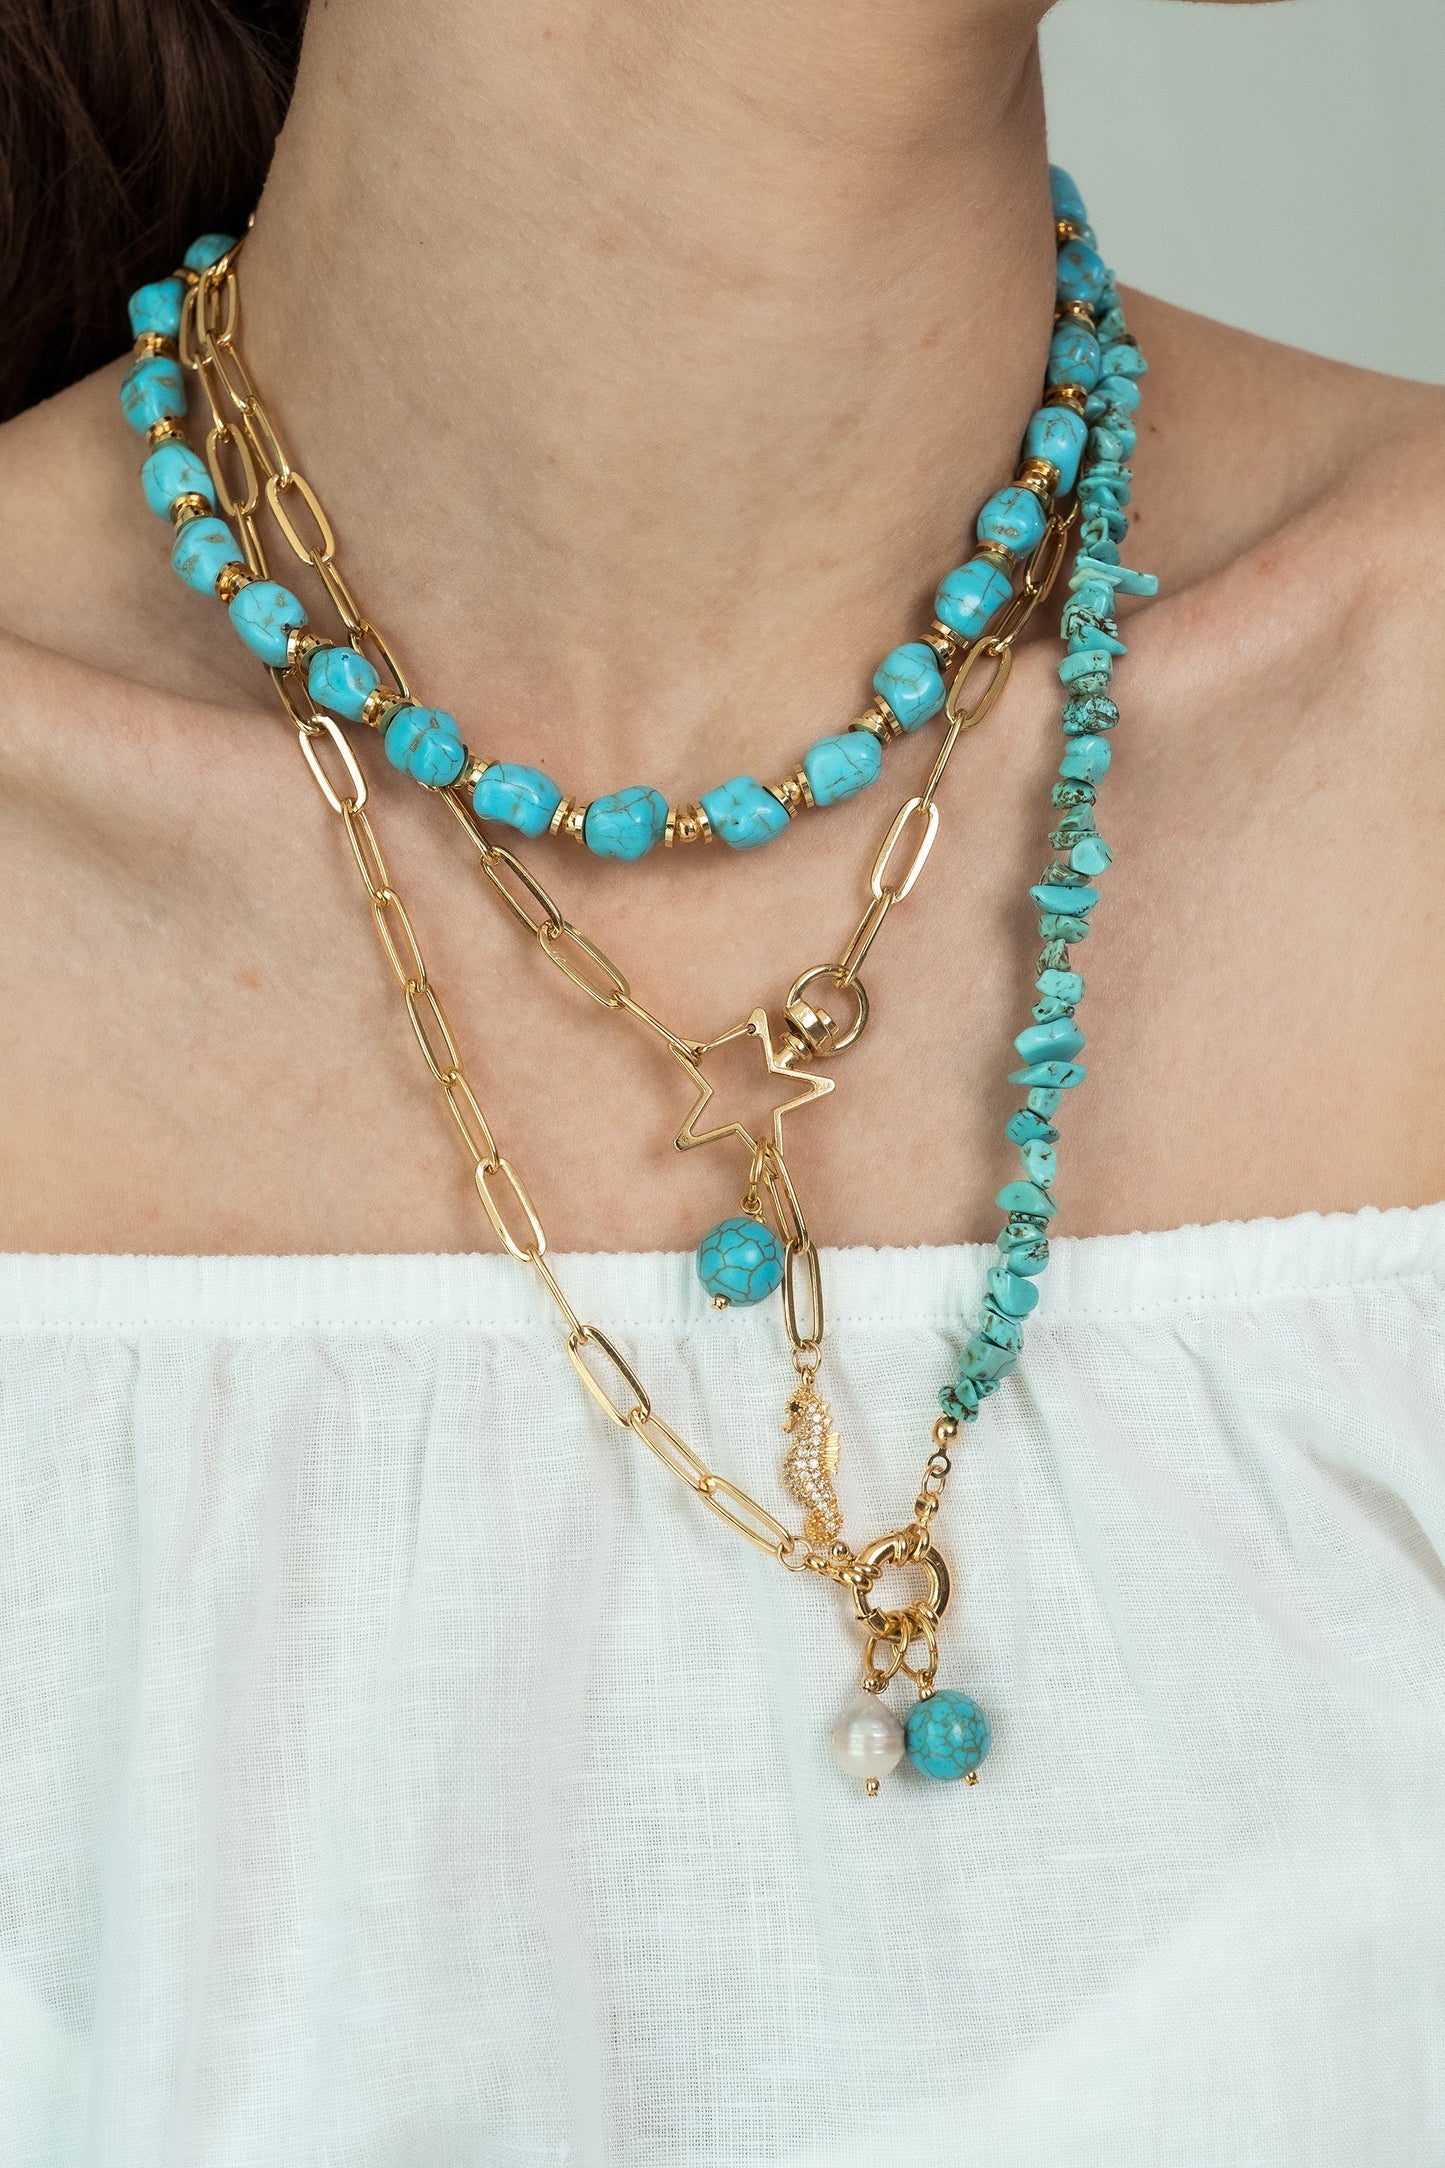 Women Gold-Plated Boho Layered Necklace Set 3Pcs, Turquoise Stone, Link Chain with Seahorse & Stone Pendant, Half Chain & Turquoise with Beads, Bohemian Style Trendy & Adjustable Fashion Jewelry